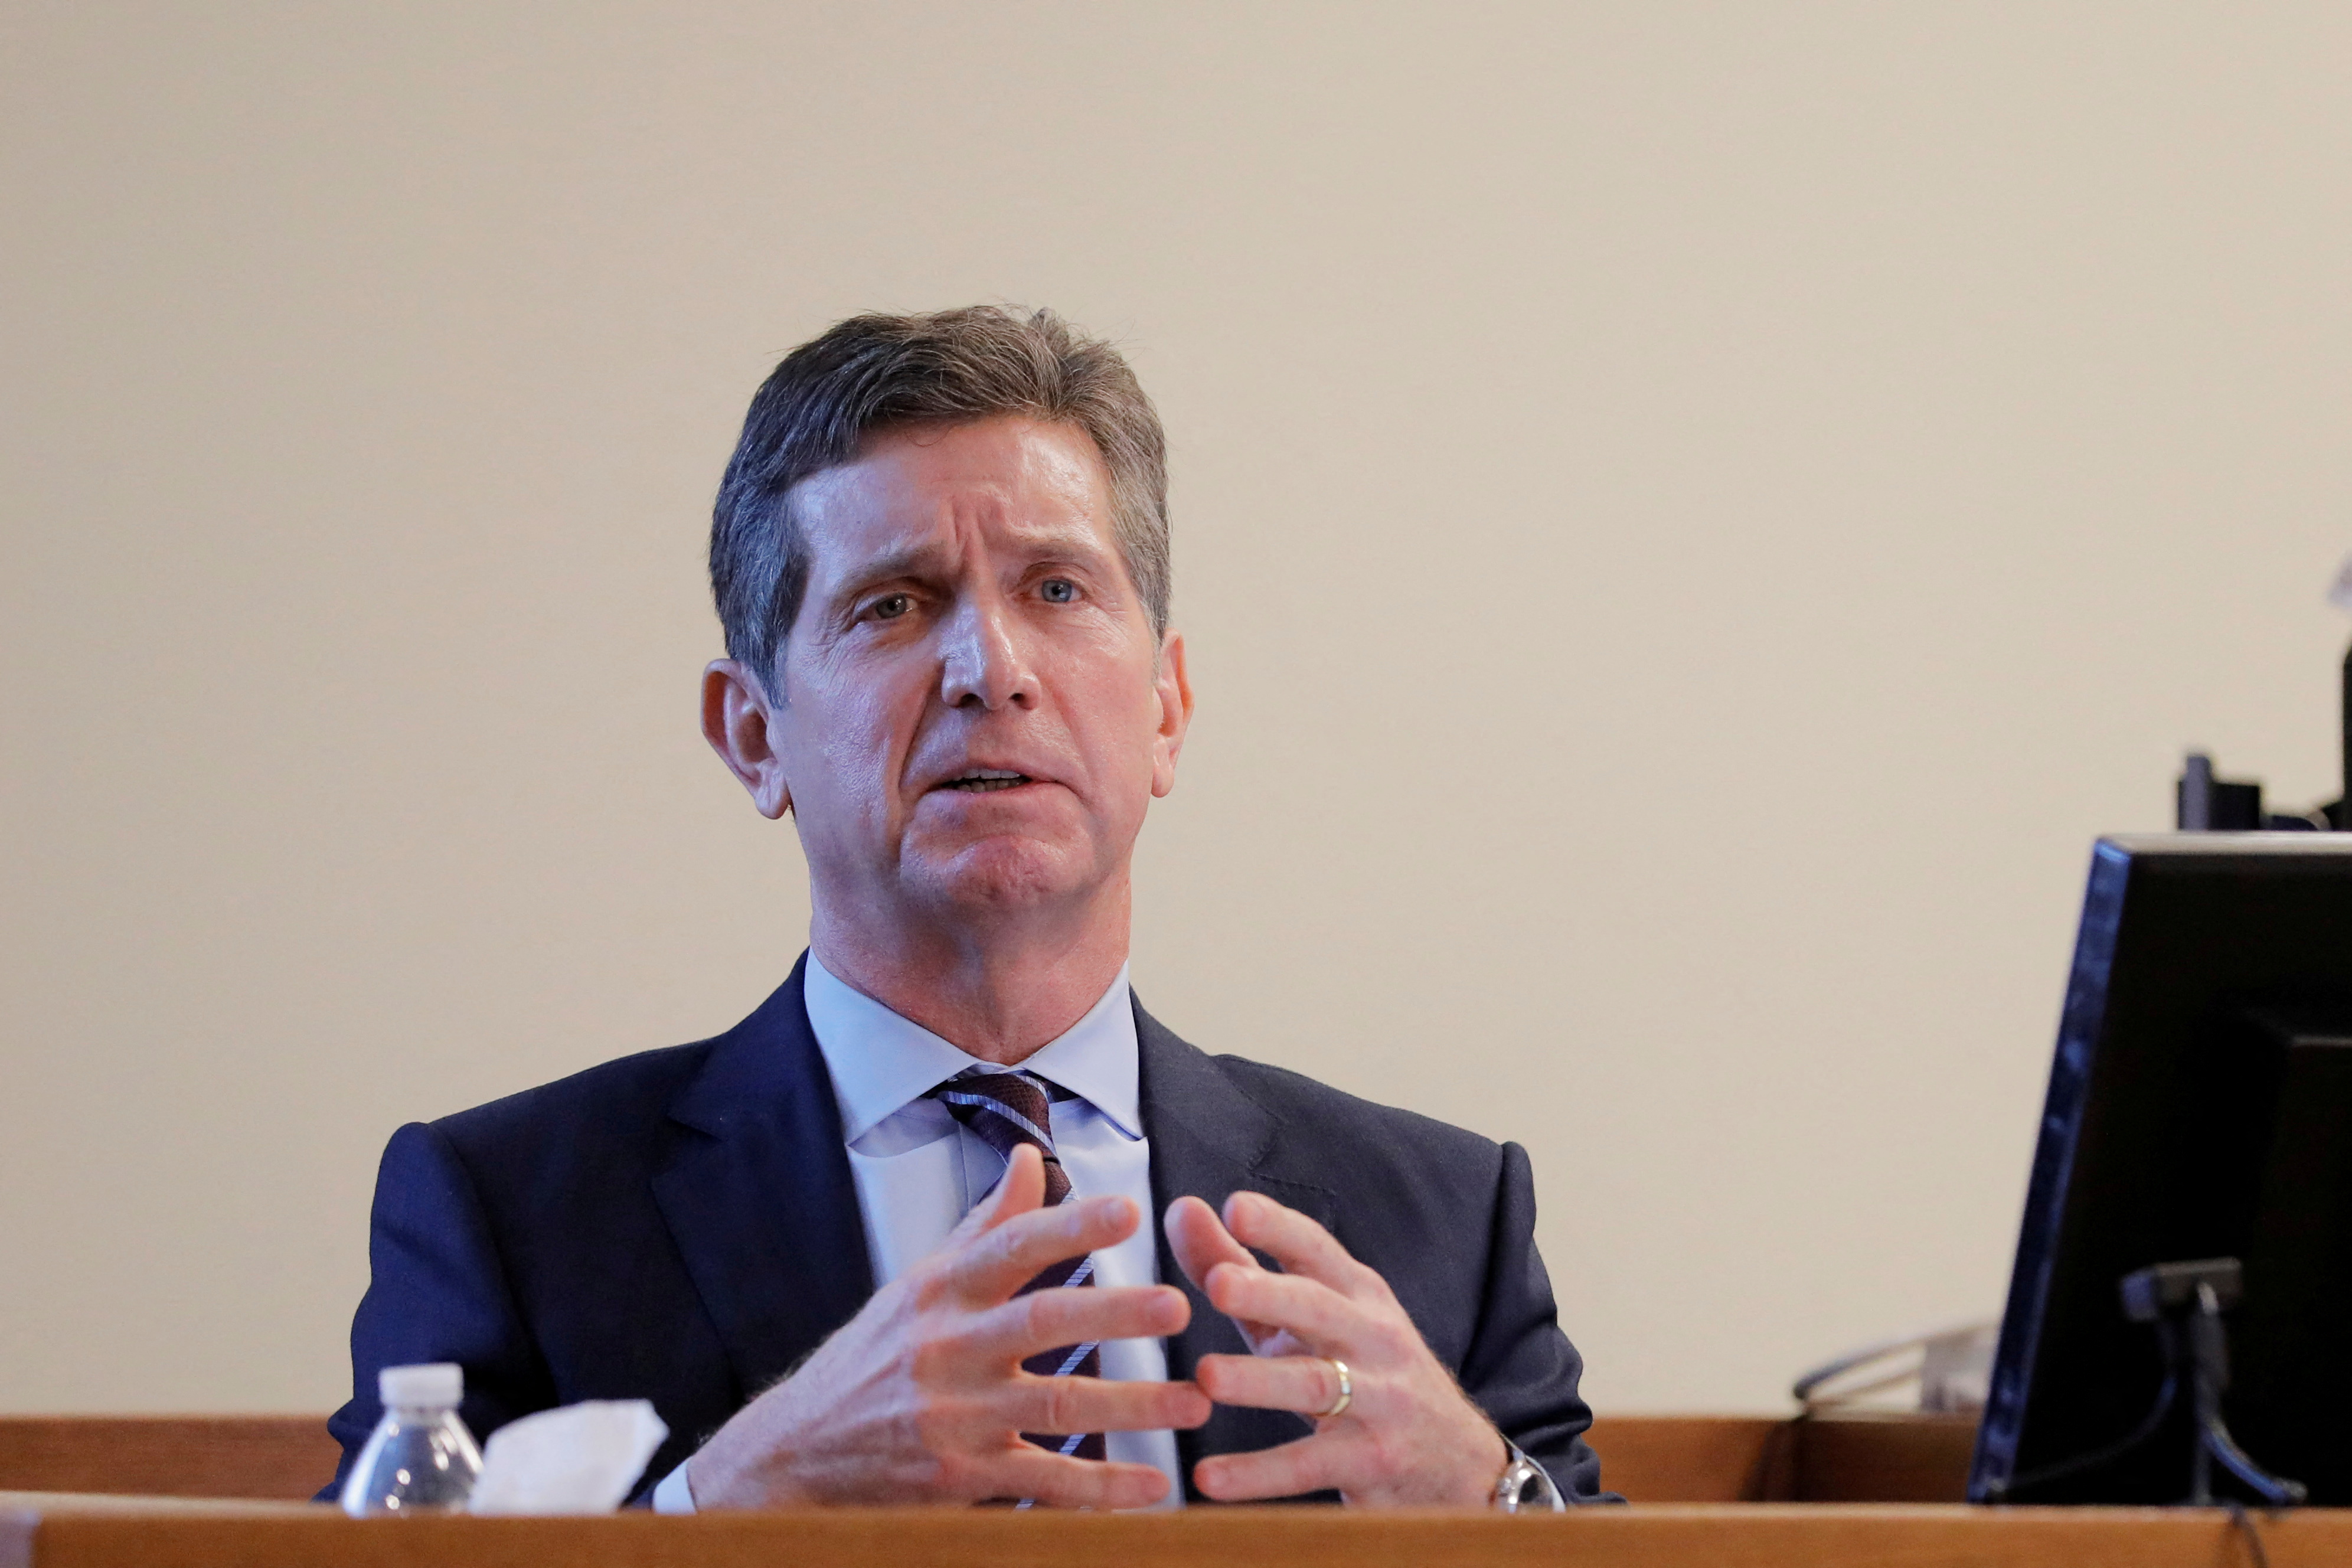 Alex Gorsky, chairman and CEO of Johnson & Johnson, takes the stand in New Jersey Supreme Court in New Brunswick, New Jersey